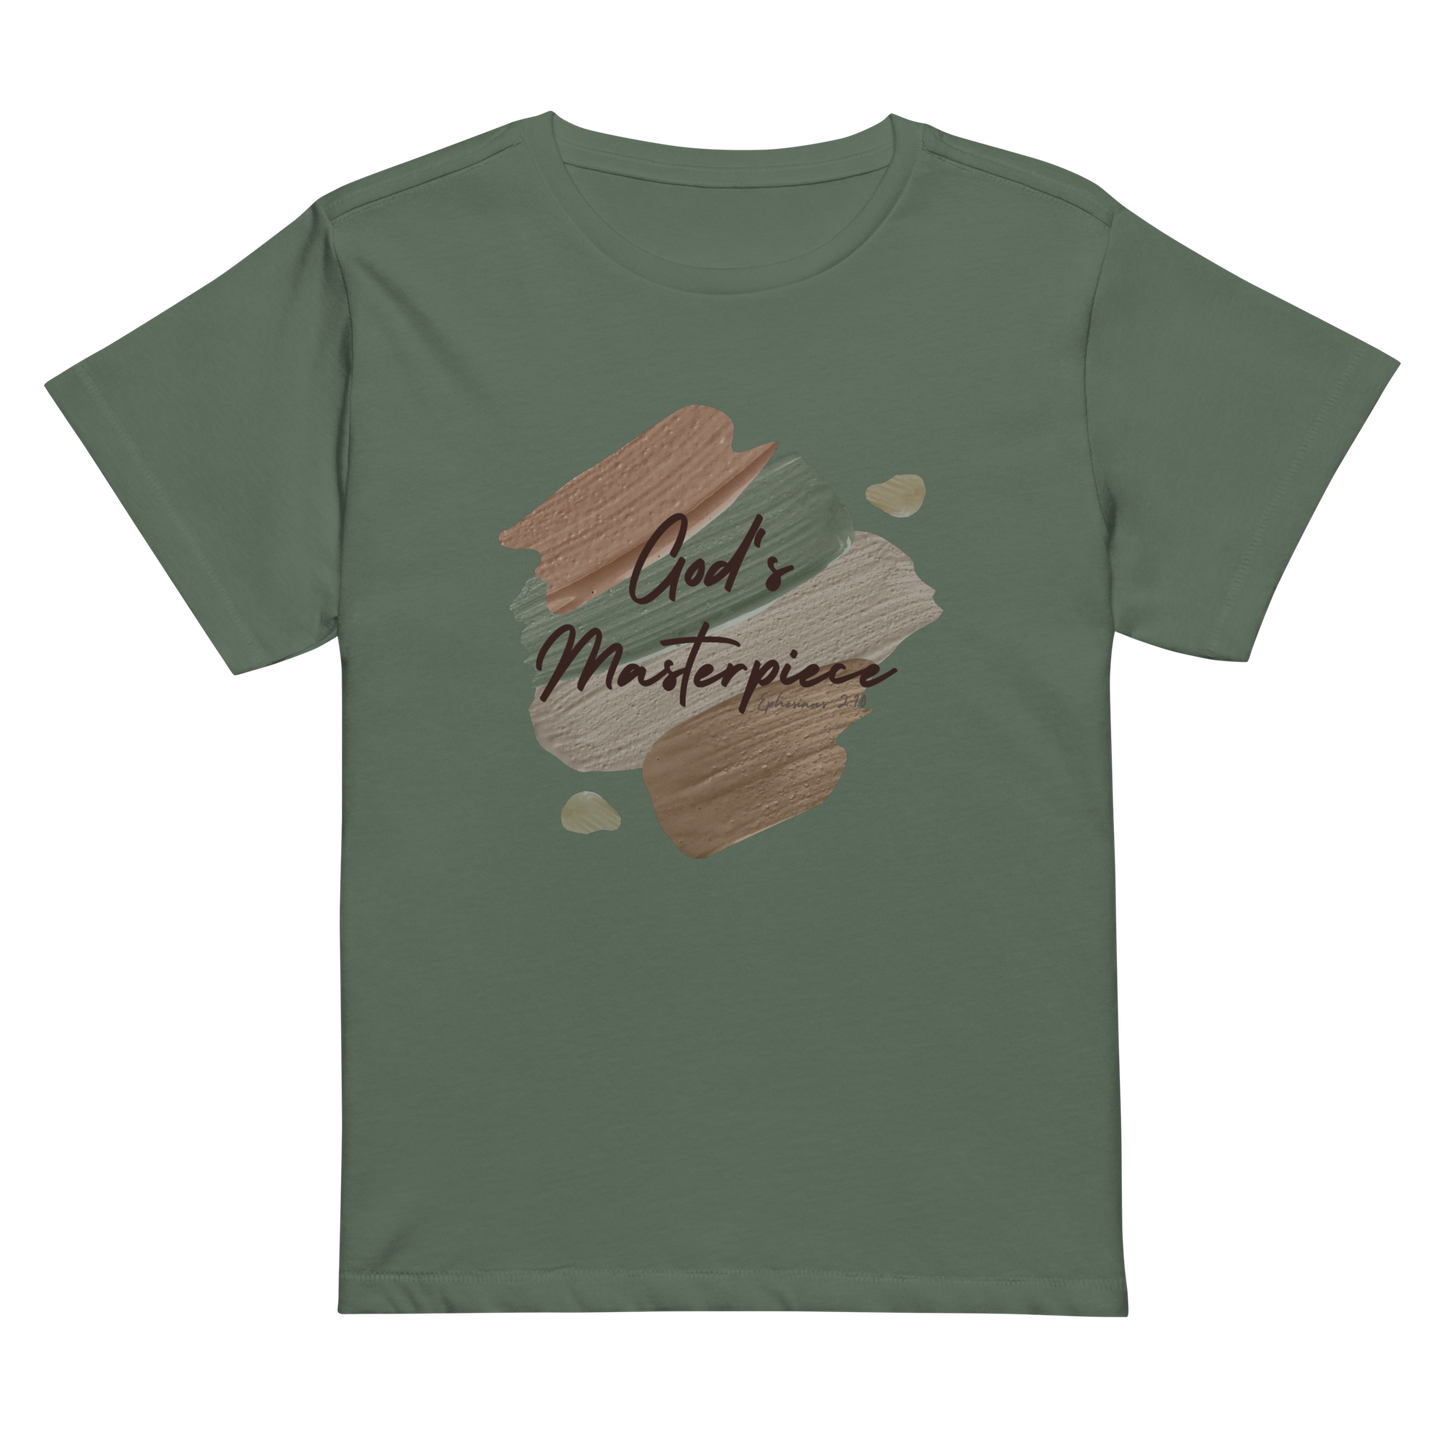 "Masterpiece Creation" T-shirt - Inspired by Ephesians 2:10